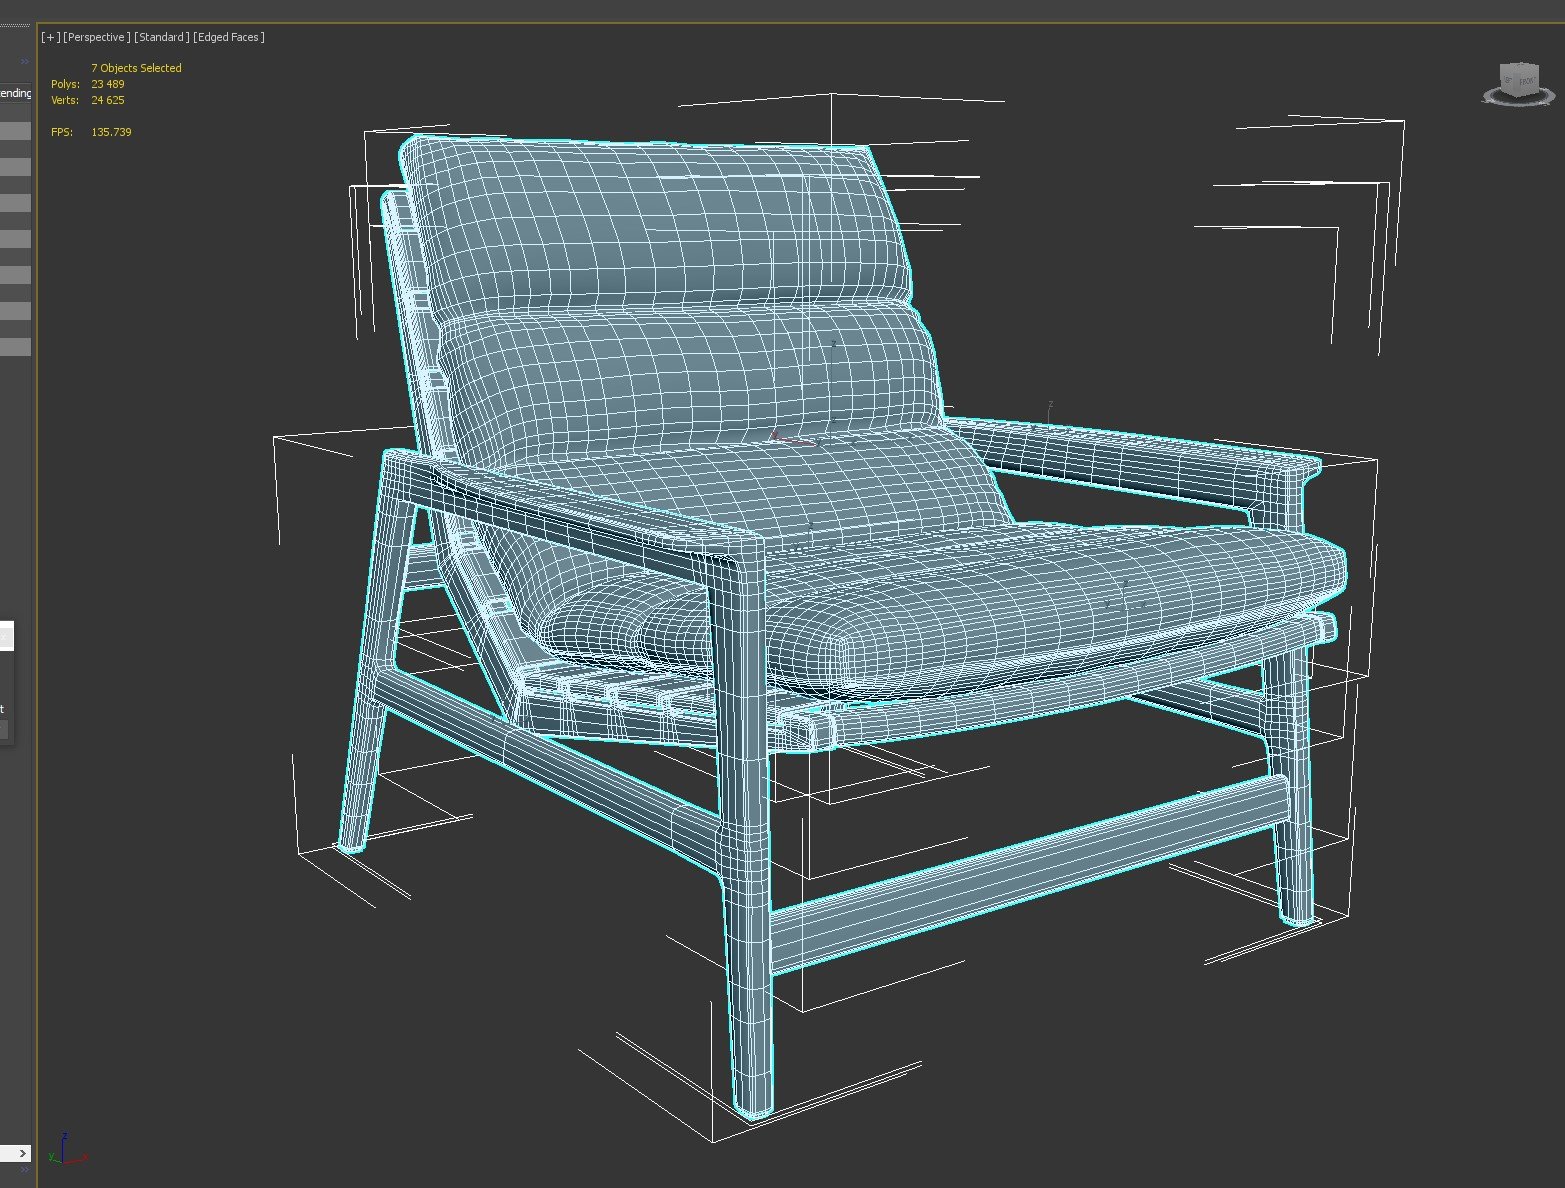 Wireframe Modeling of an Armchair